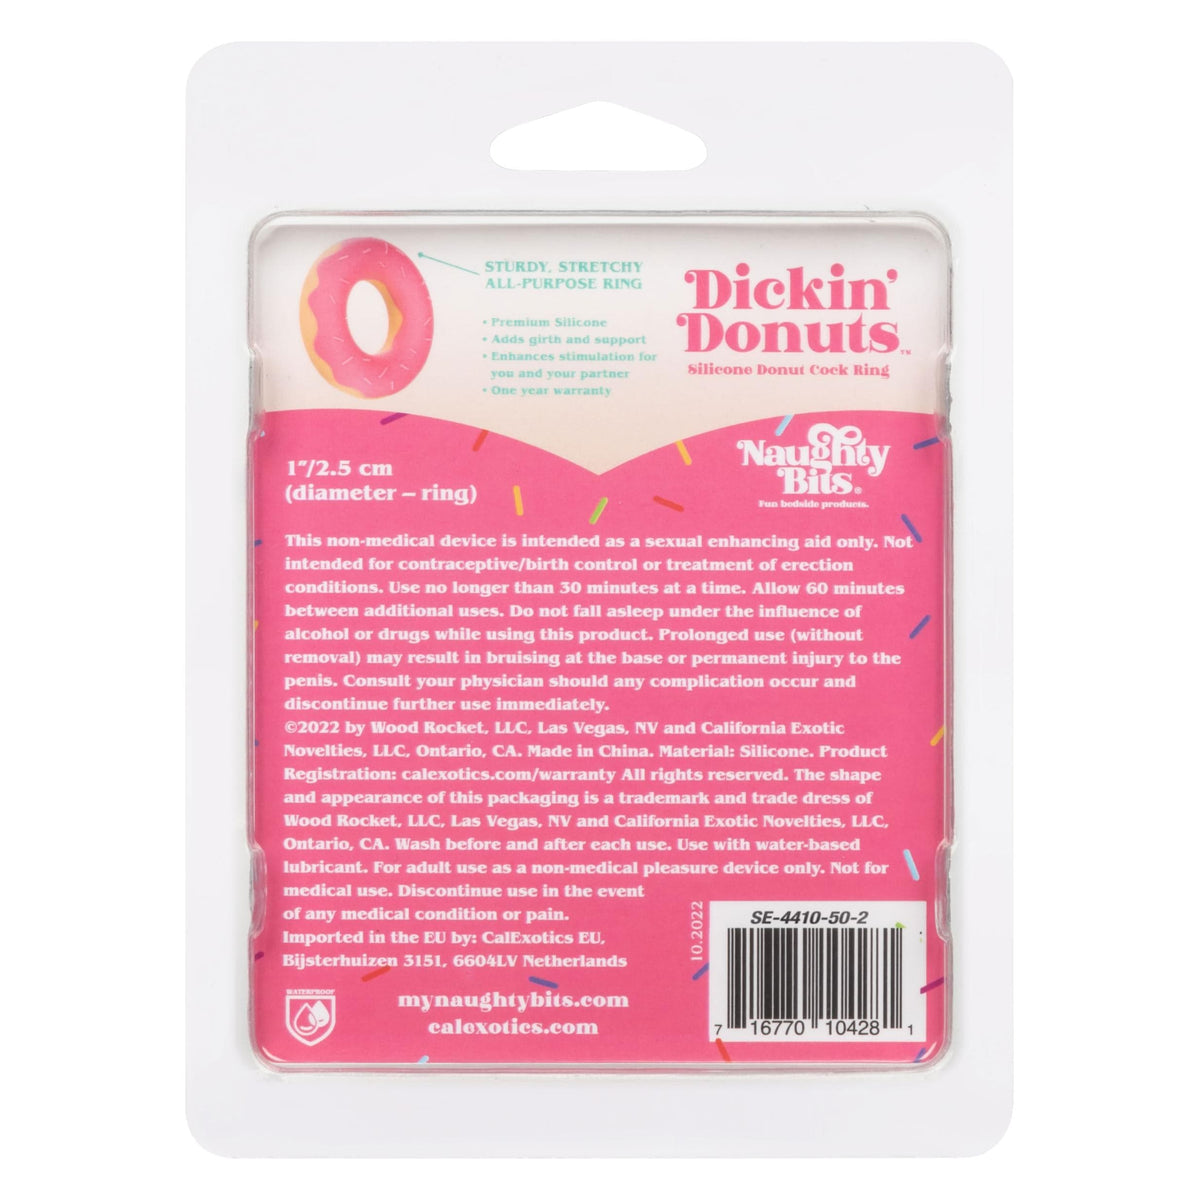 naughty bits dickin donuts silicone donut cock ring pink